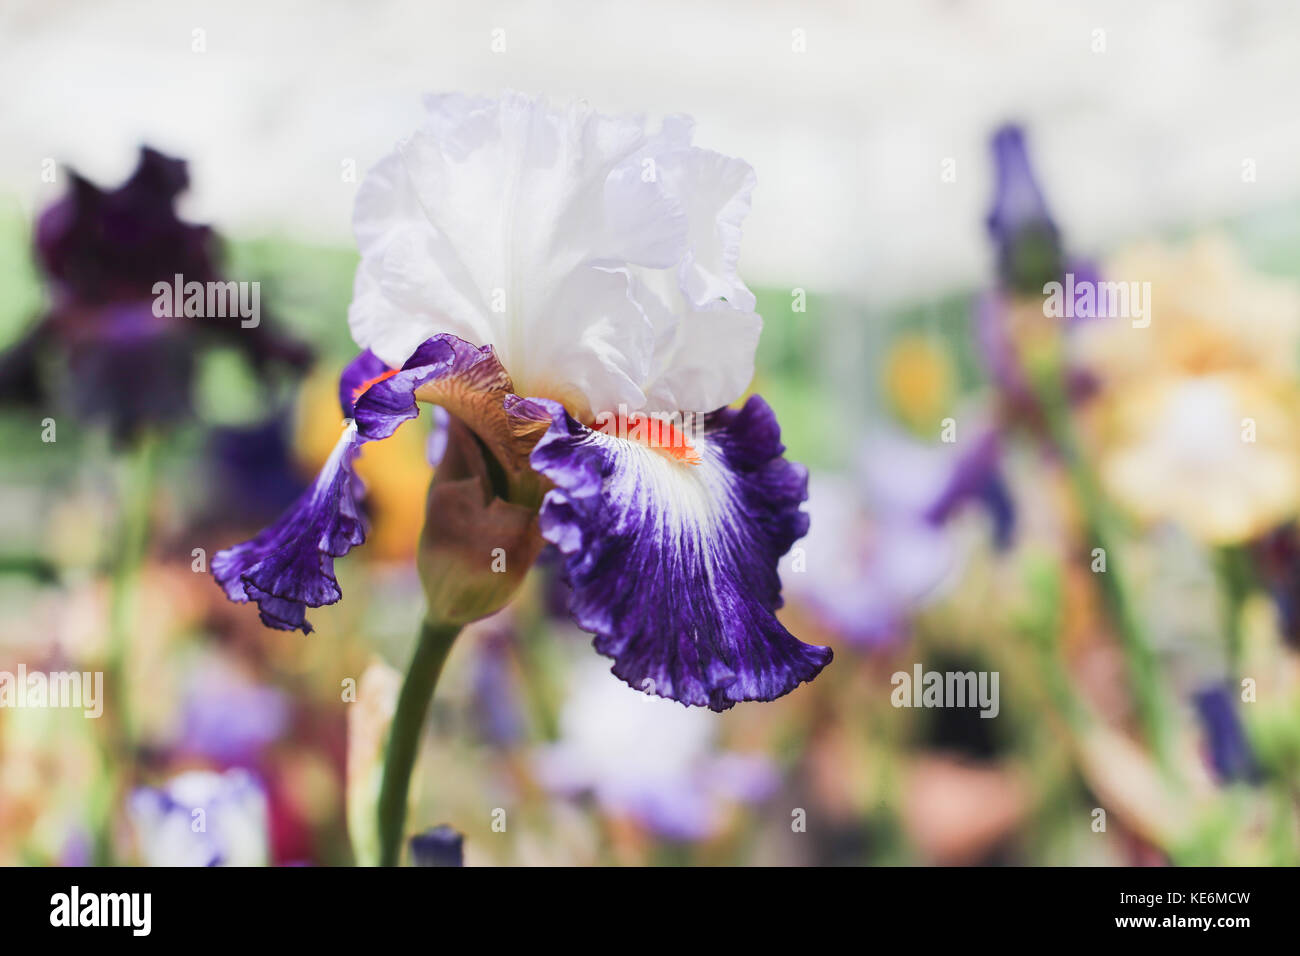 White and violet iris flower close-up Stock Photo